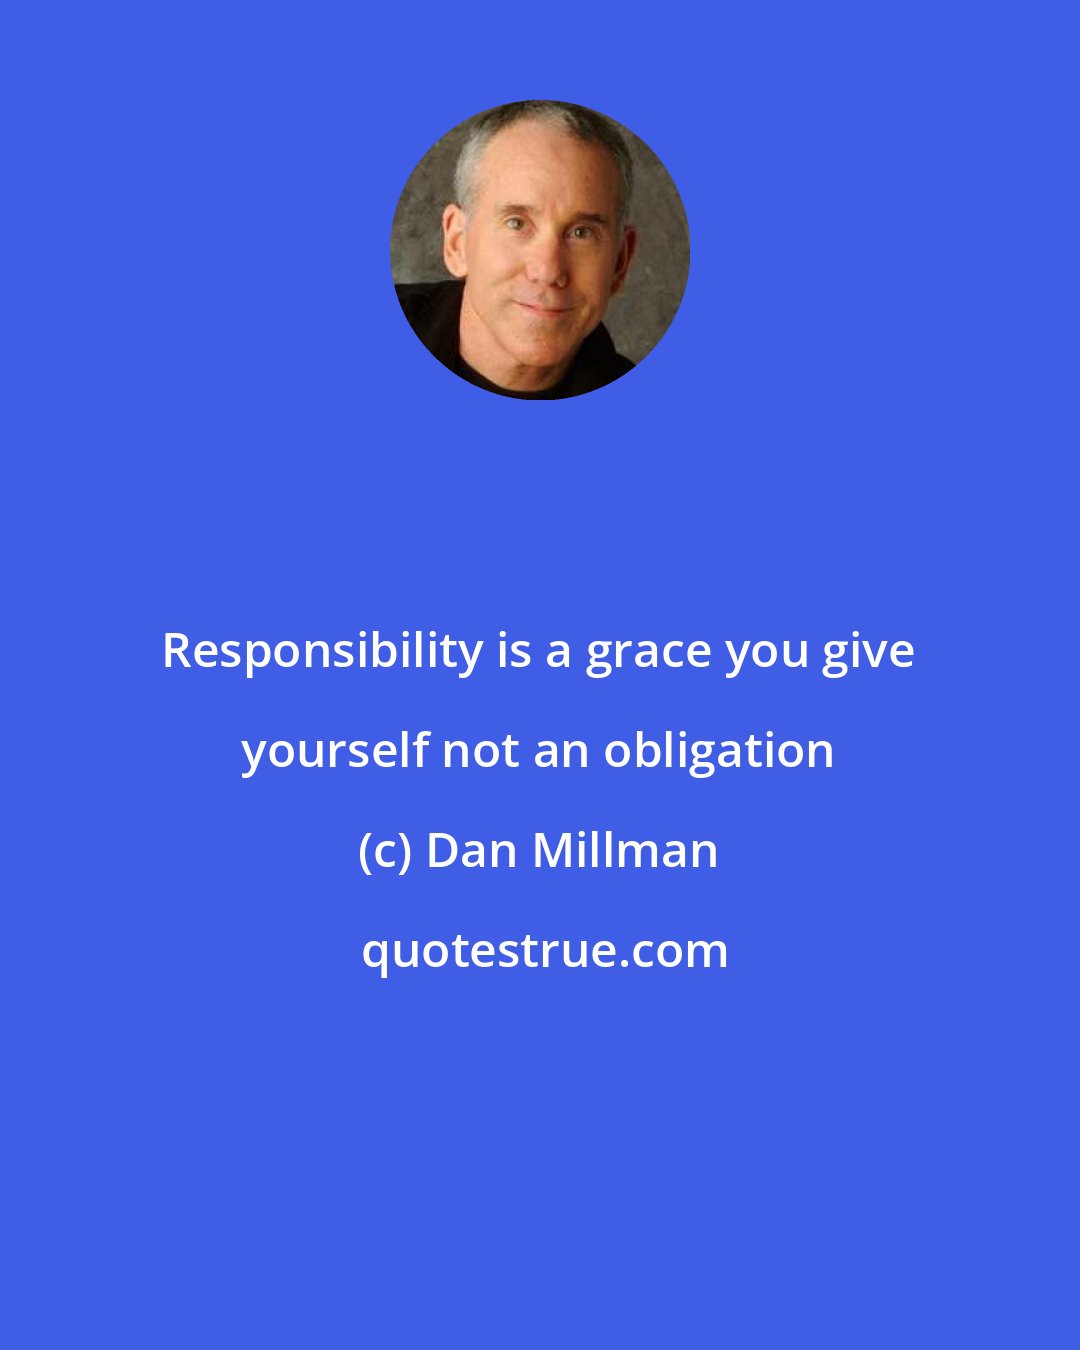 Dan Millman: Responsibility is a grace you give yourself not an obligation